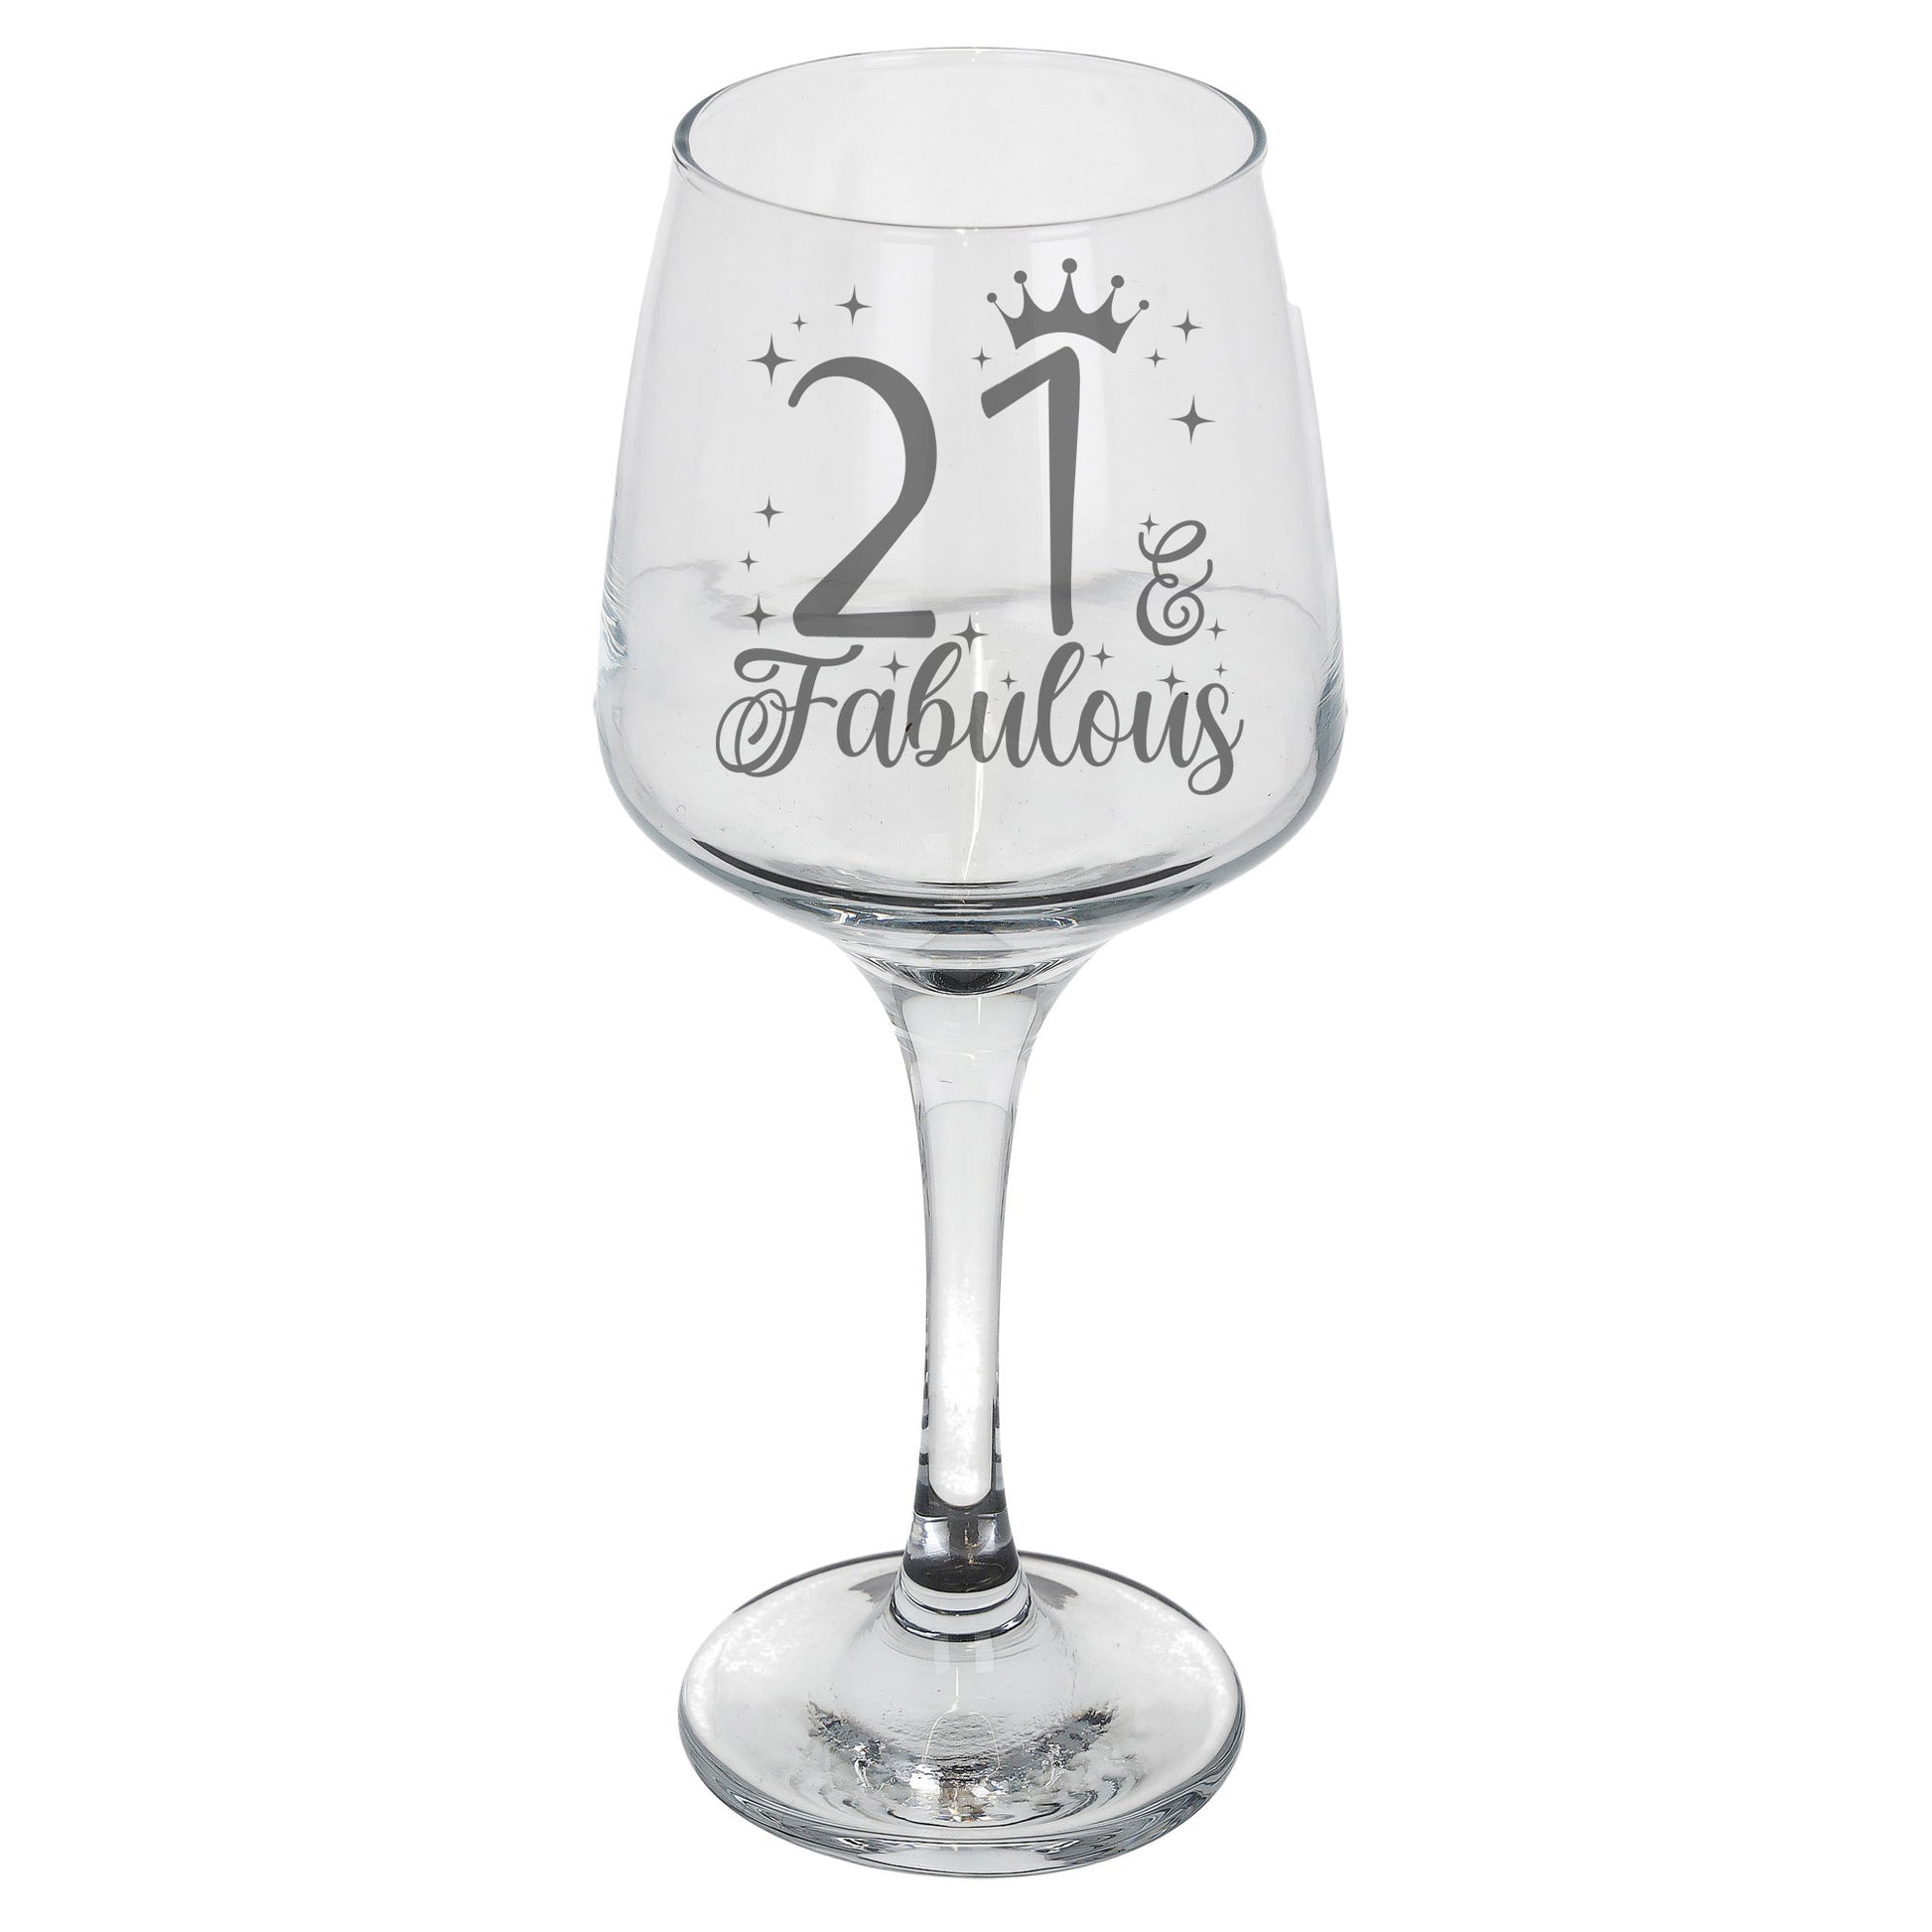 21 & Fabulous 21st Birthday Gift Engraved Wine Glass and/or Coaster Set  - Always Looking Good -   